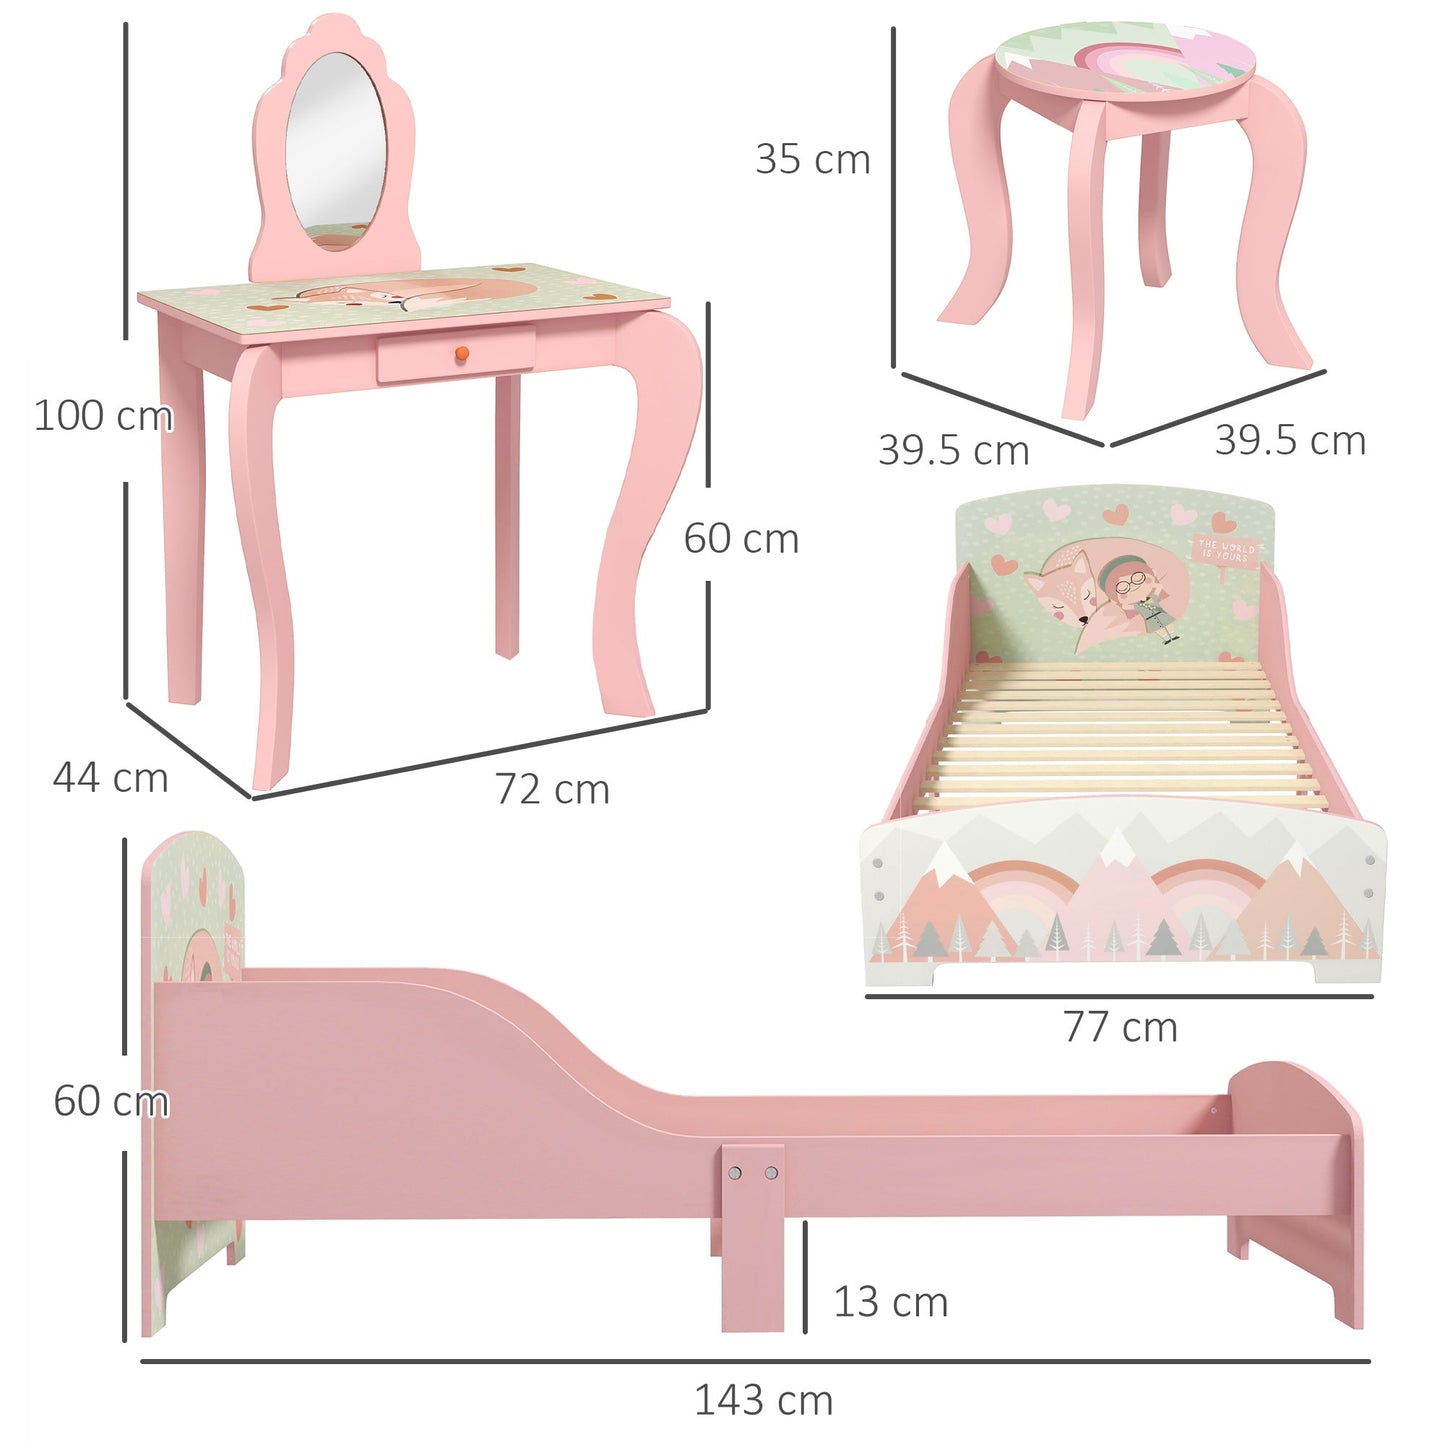 ZONEKIZ Toddler Bed Frame, Kids Dressing Table with Mirror and Stool, Cute Animal Design Kids Bedroom Furniture Set for Ages 3-6 Years, Pink